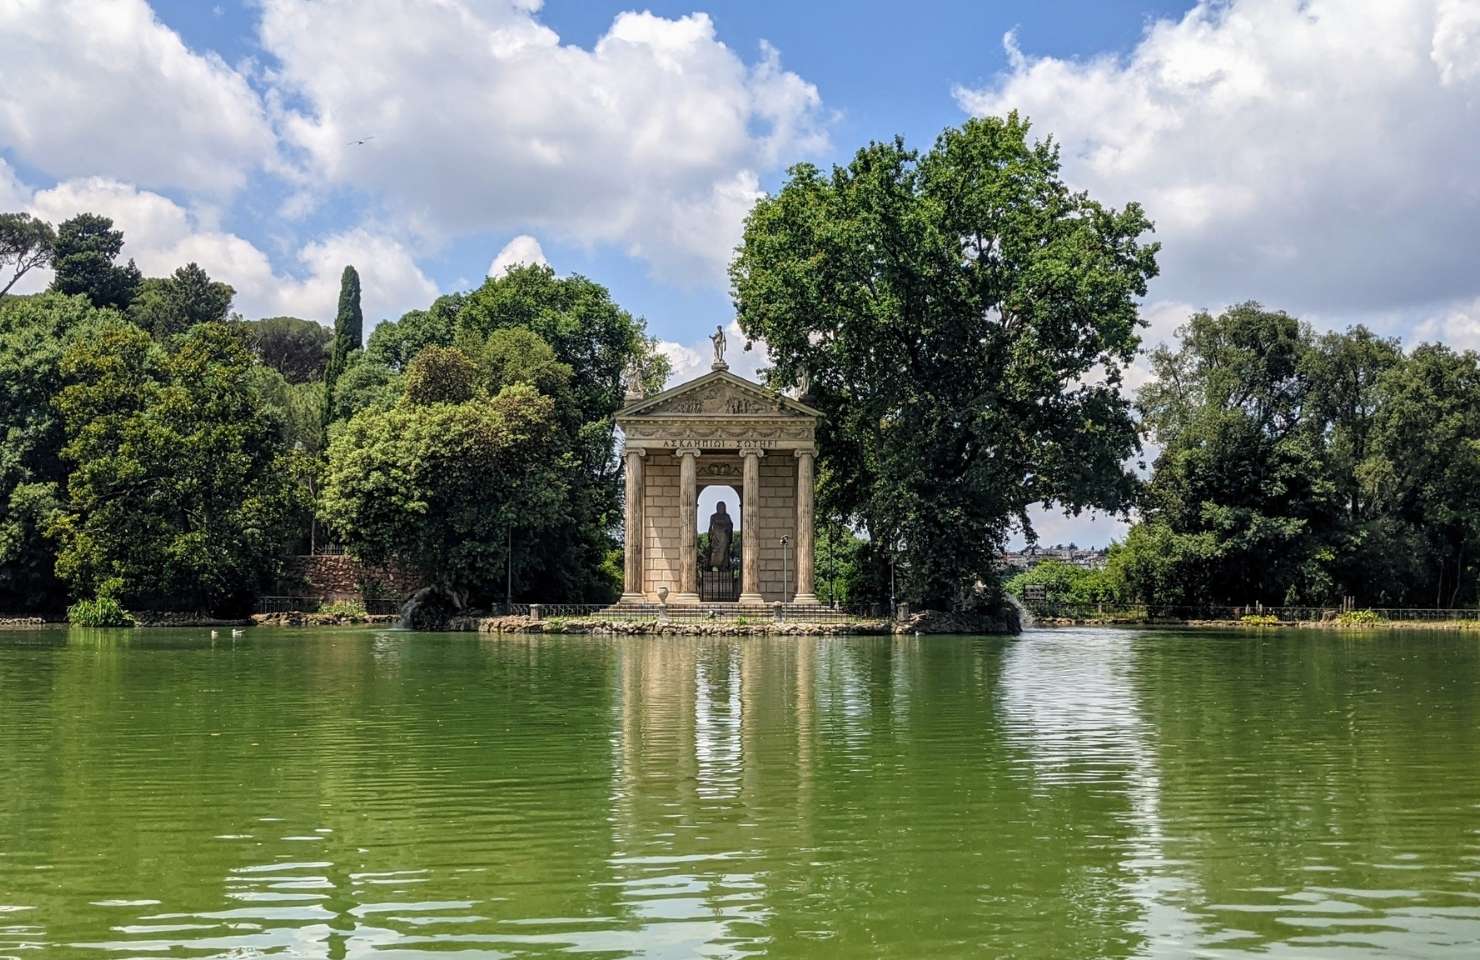 Park with a lake in Rome